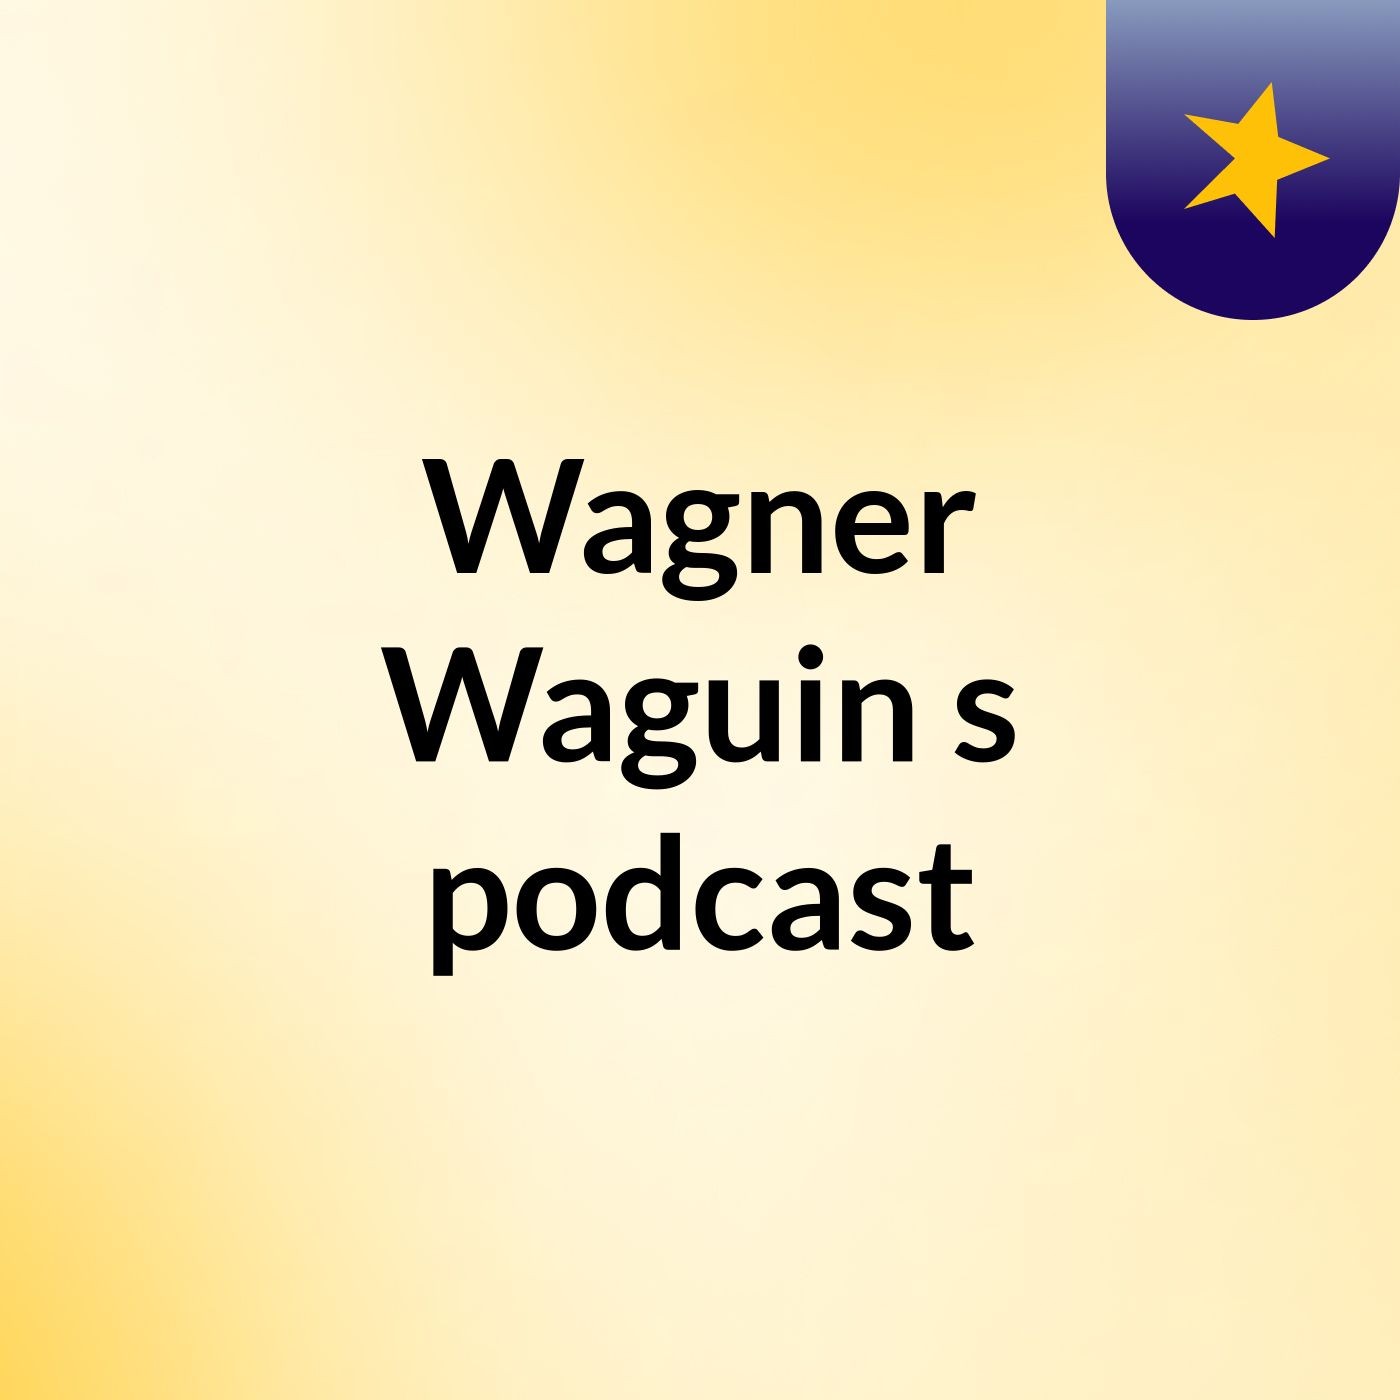 Wagner Waguin's podcast